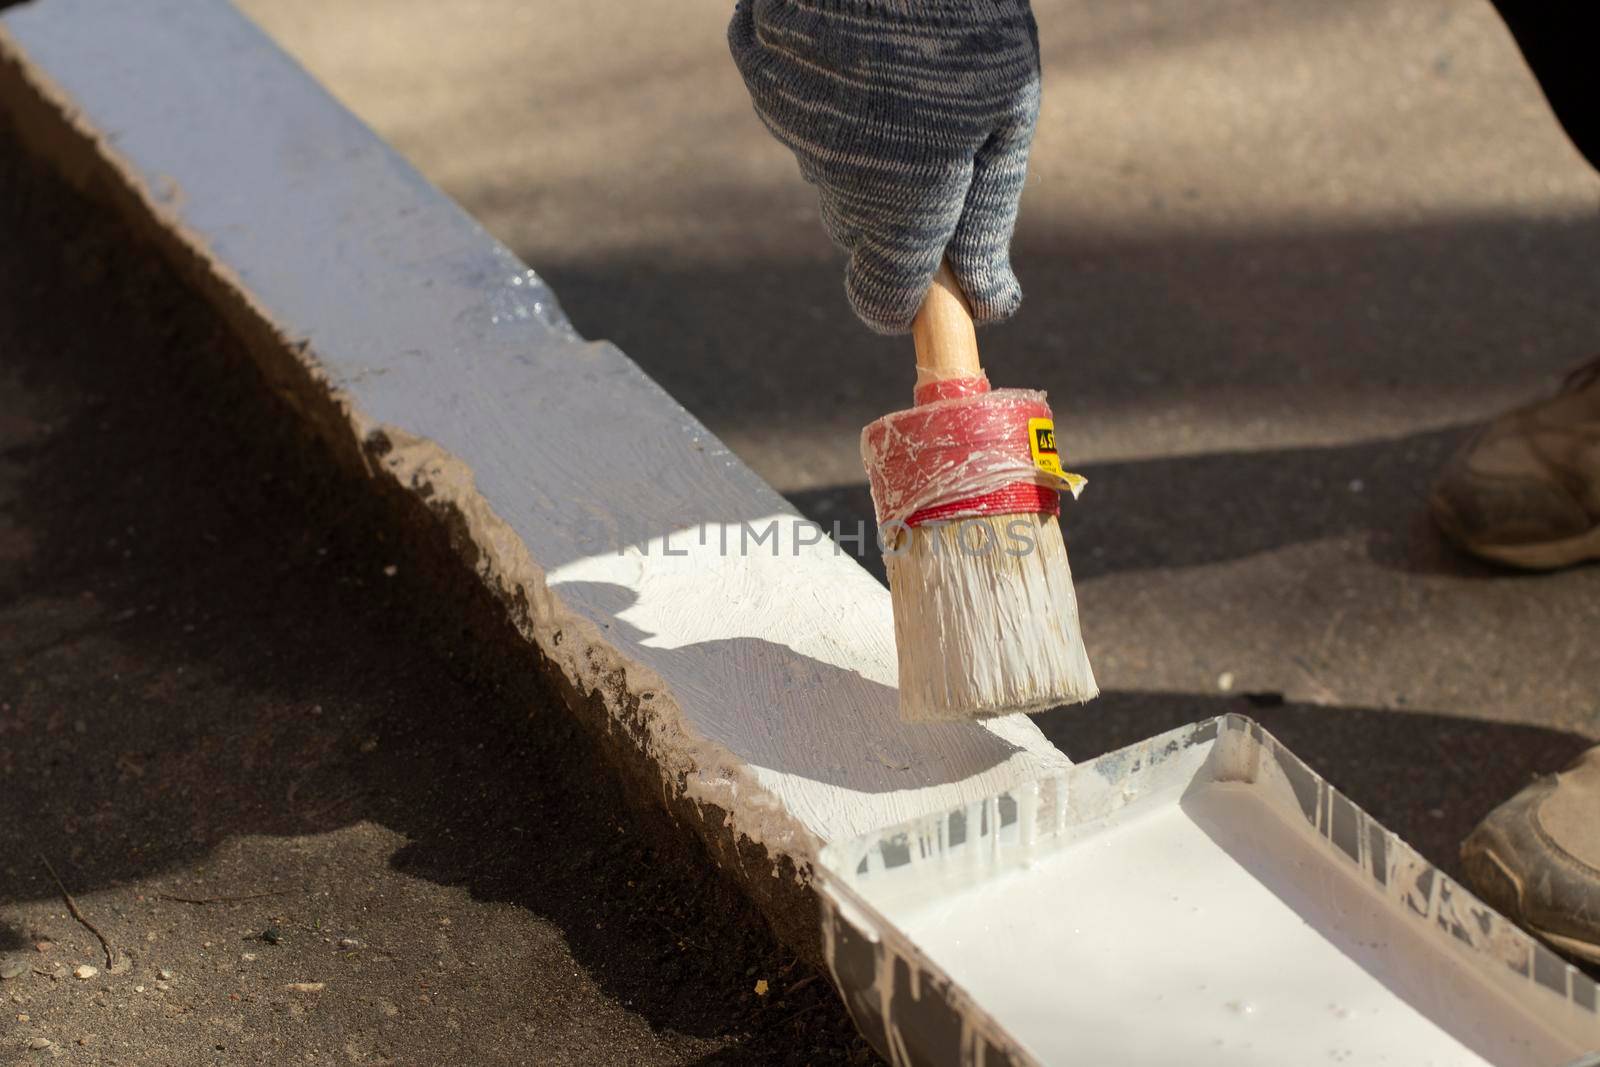 Paints the kerb with white paint. Brush with paint for the road curb. Painting the road. The man in the glove paints.